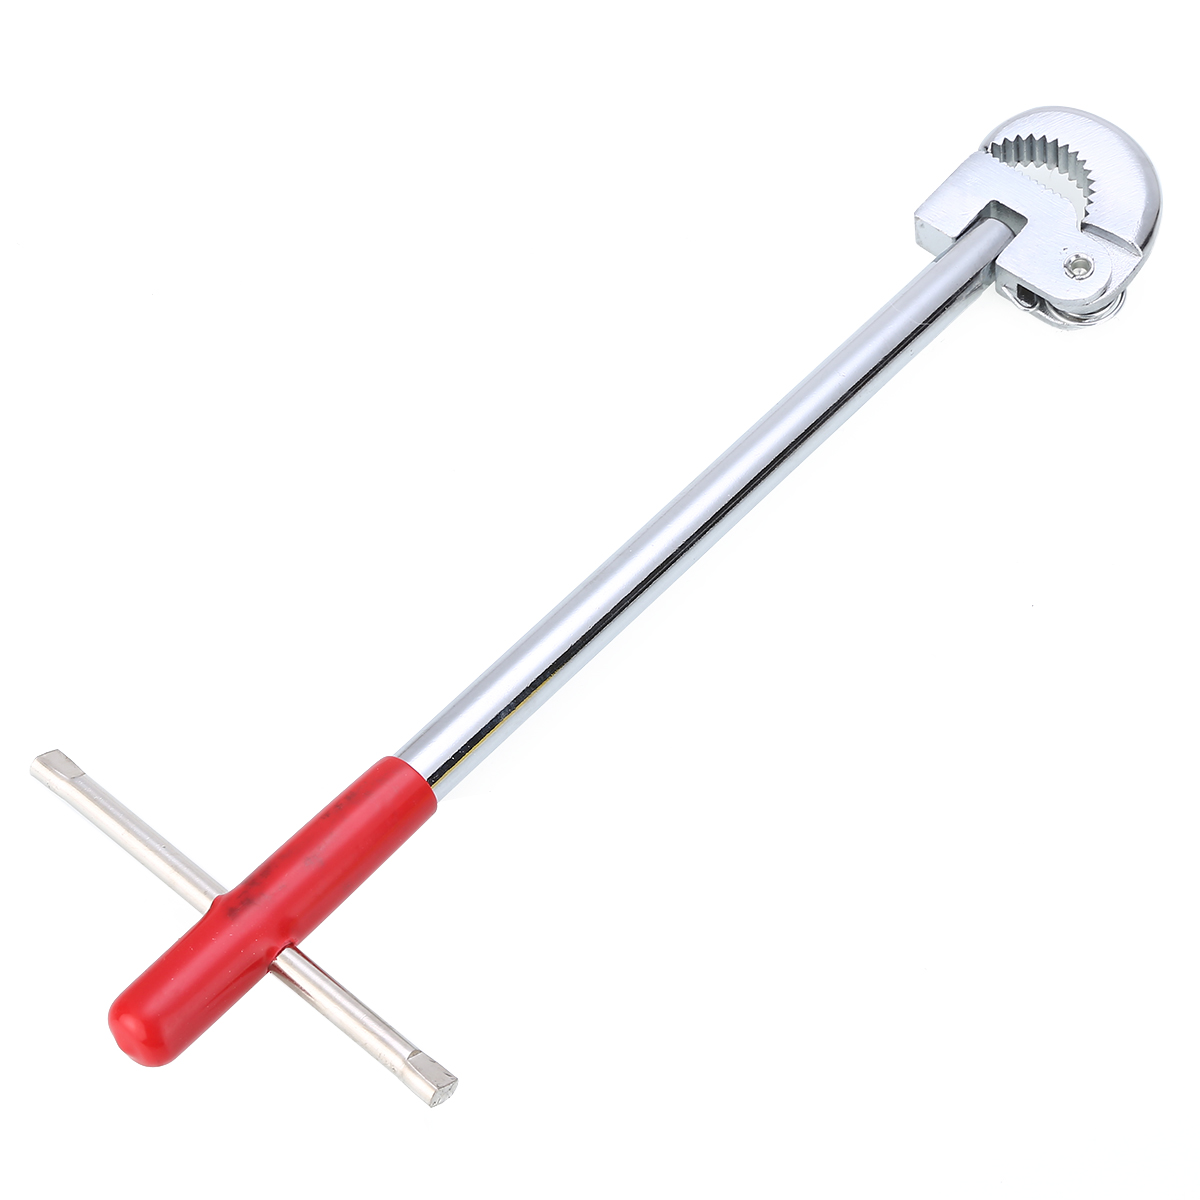 11inch T Type Adjustable Basin Wrench Tap Steel Sink Spanner Plumbers for Plumbing Tool